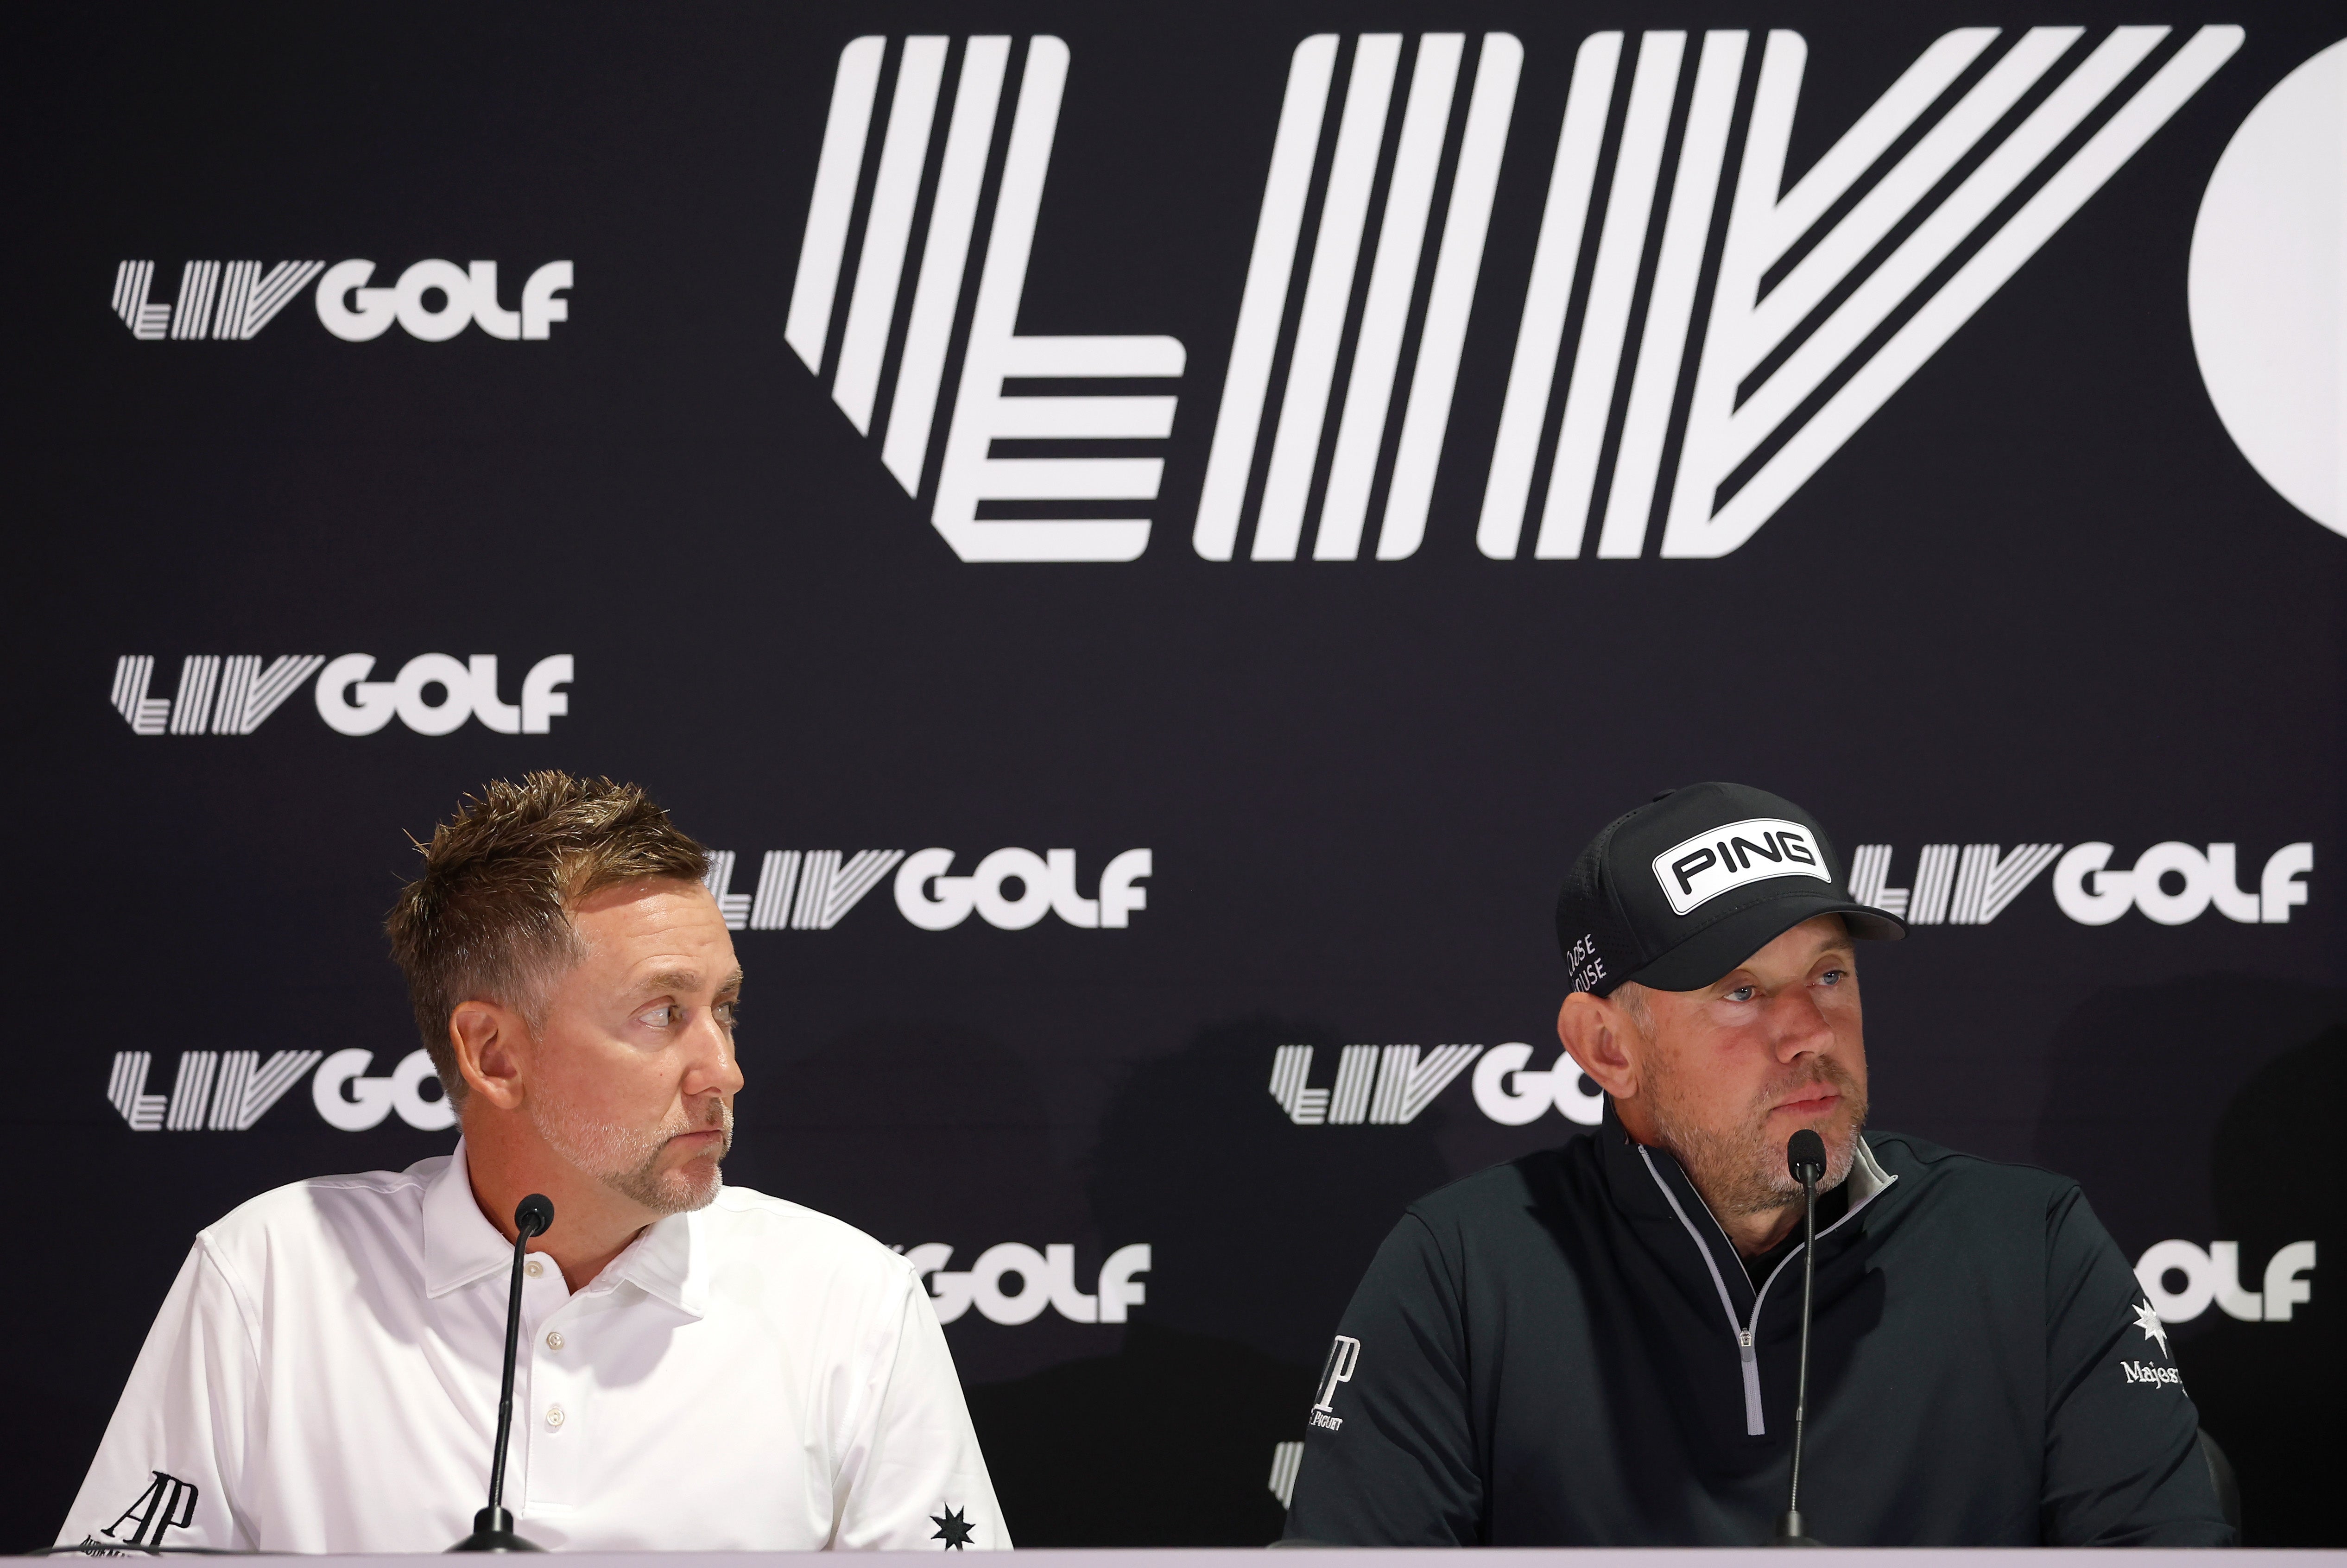 Ian Poulter and Lee Westwood are among the LIV Golf players appealing a DP World Tour ruling